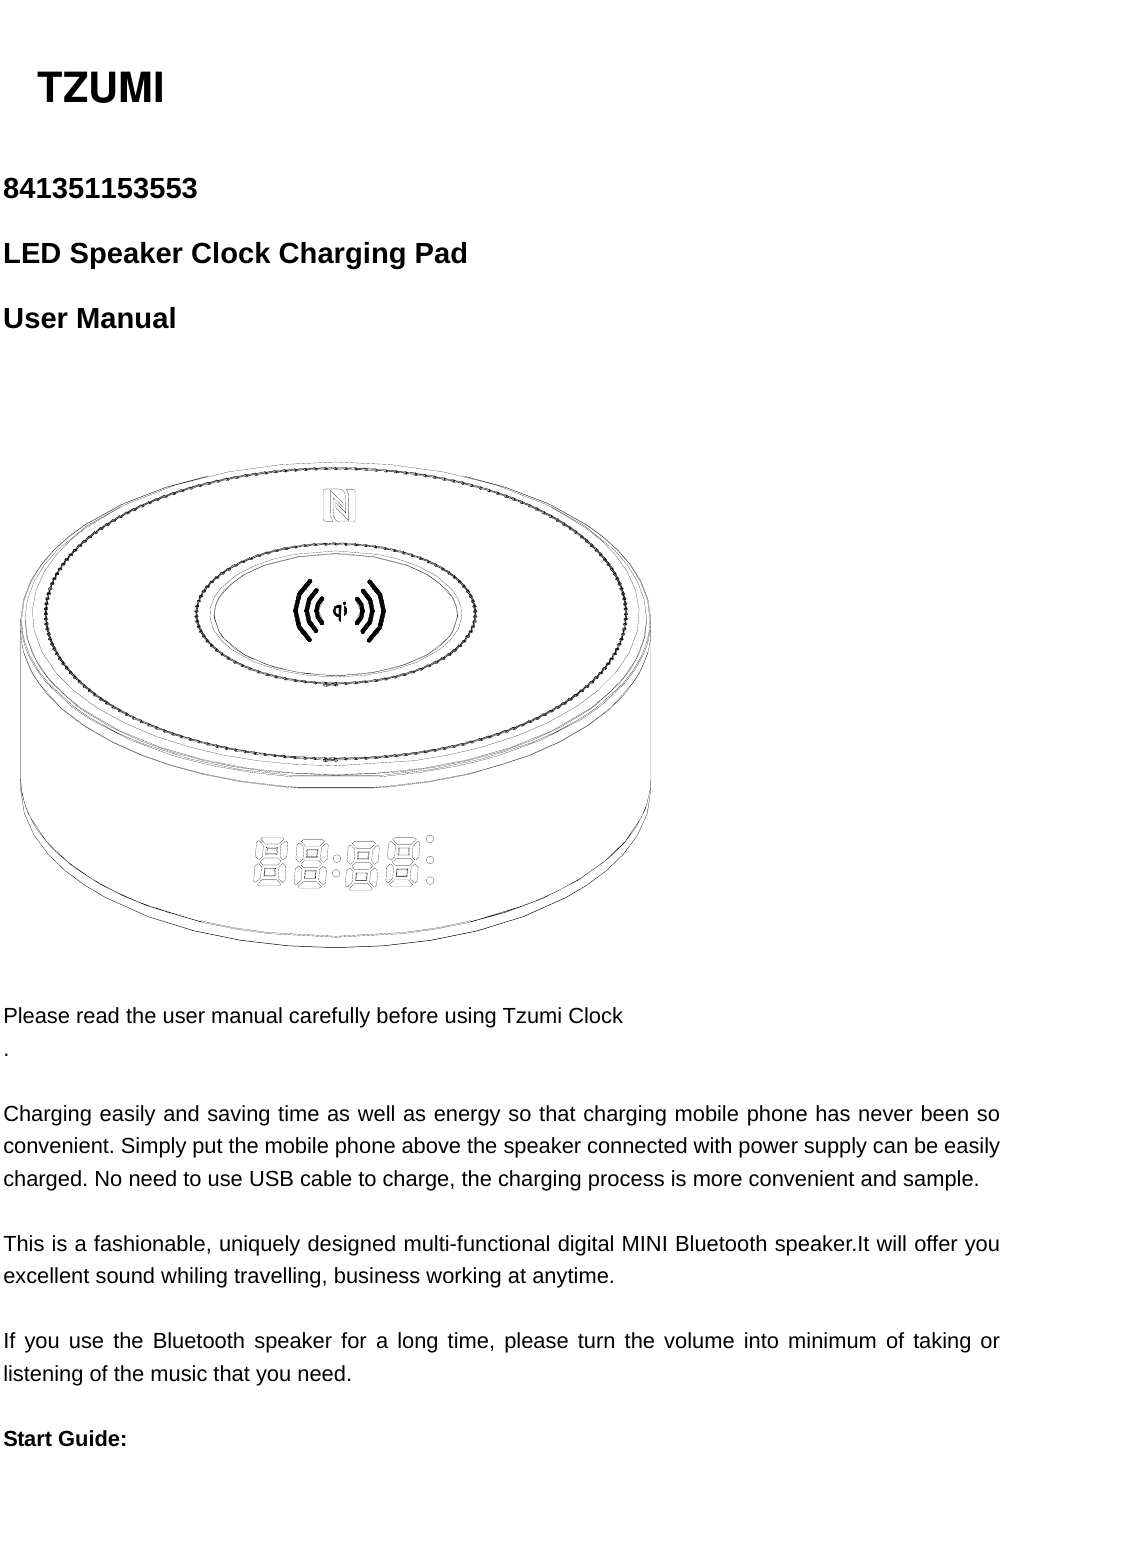   841351153553  LED Speaker Clock Charging Pad   User Manual     Please read the user manual carefully before using Tzumi Clock .  Charging easily and saving time as well as energy so that charging mobile phone has never been so convenient. Simply put the mobile phone above the speaker connected with power supply can be easily charged. No need to use USB cable to charge, the charging process is more convenient and sample.  This is a fashionable, uniquely designed multi-functional digital MINI Bluetooth speaker.It will offer you excellent sound whiling travelling, business working at anytime.  If you use the Bluetooth speaker for a long time, please turn the volume into minimum of taking or listening of the music that you need.  Start Guide: TZUMI